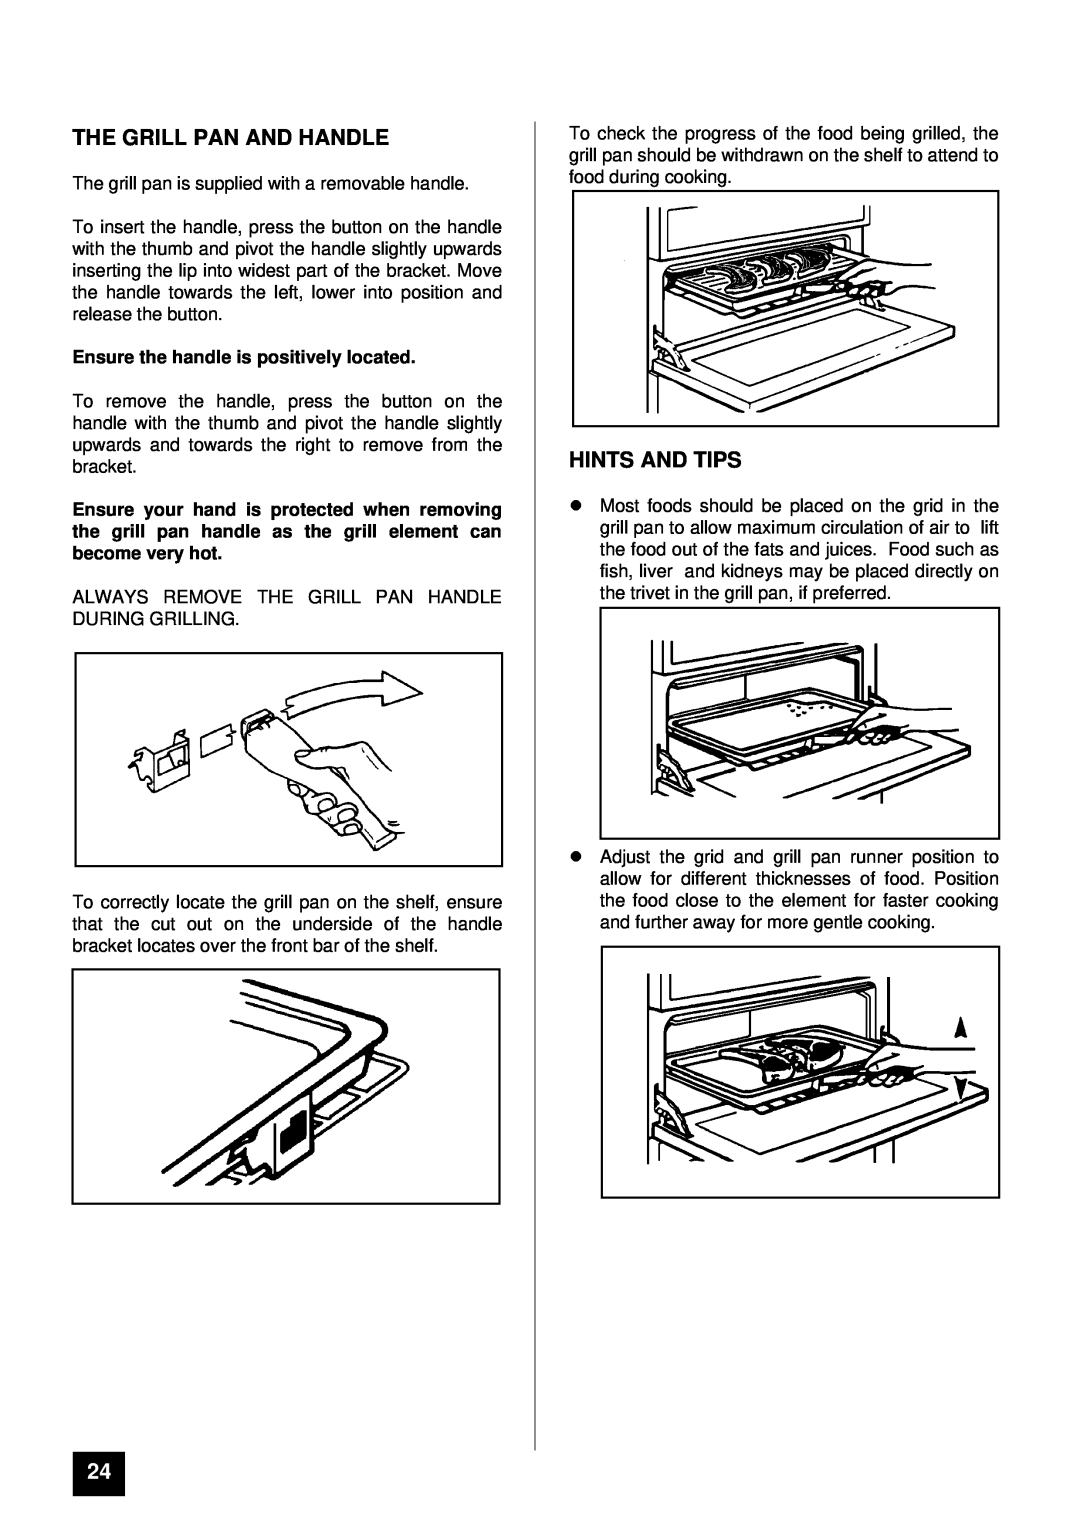 Tricity Bendix BS 631/2 The Grill Pan And Handle, lHINTS AND TIPS, Ensure the handle is positively located 